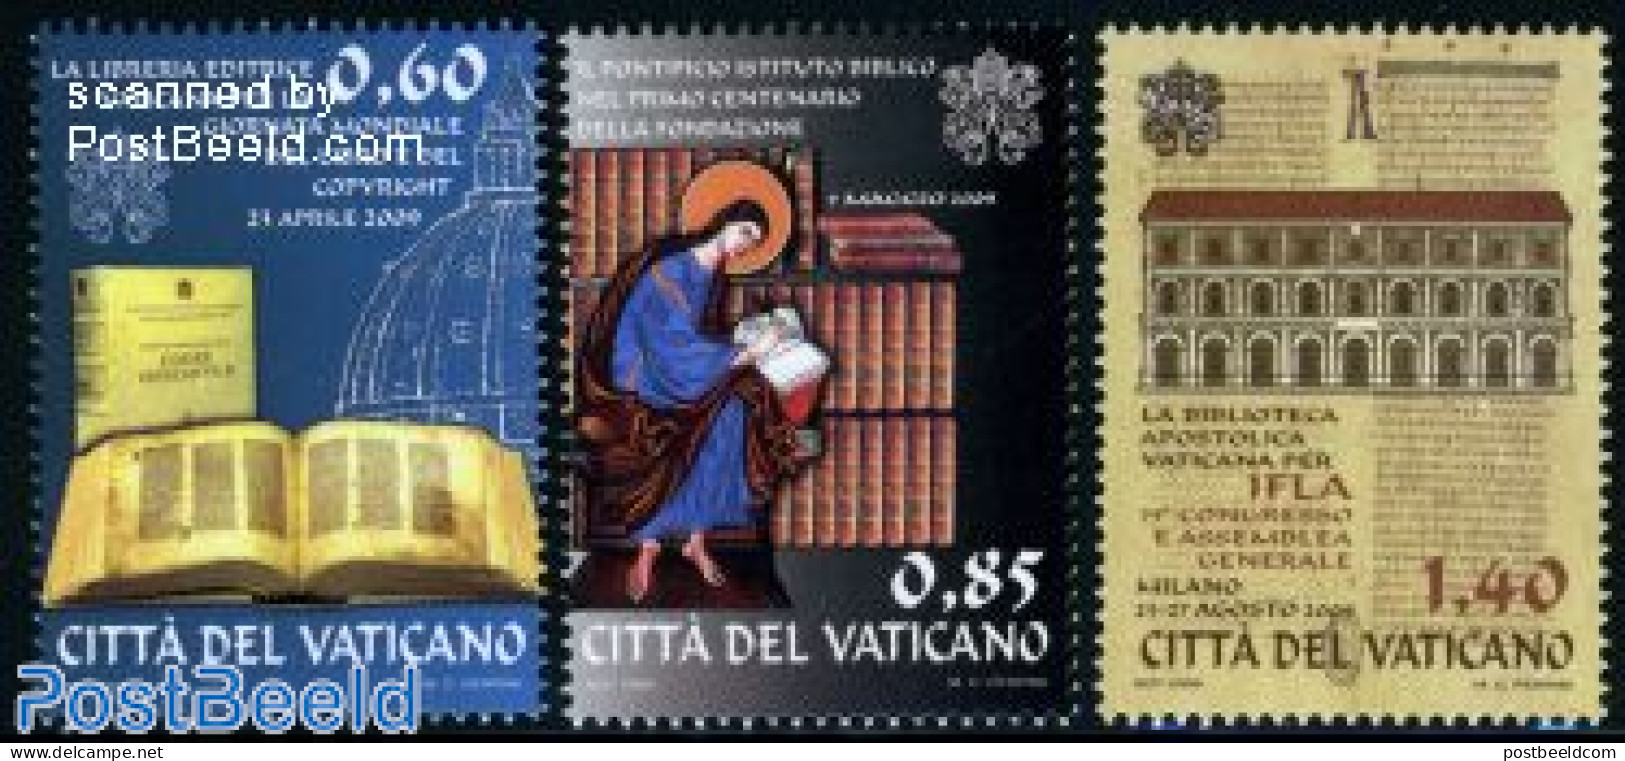 Vatican 2009 IFLA Conference 3v, Mint NH, Religion - Bible Texts - Religion - Art - Books - Neufs